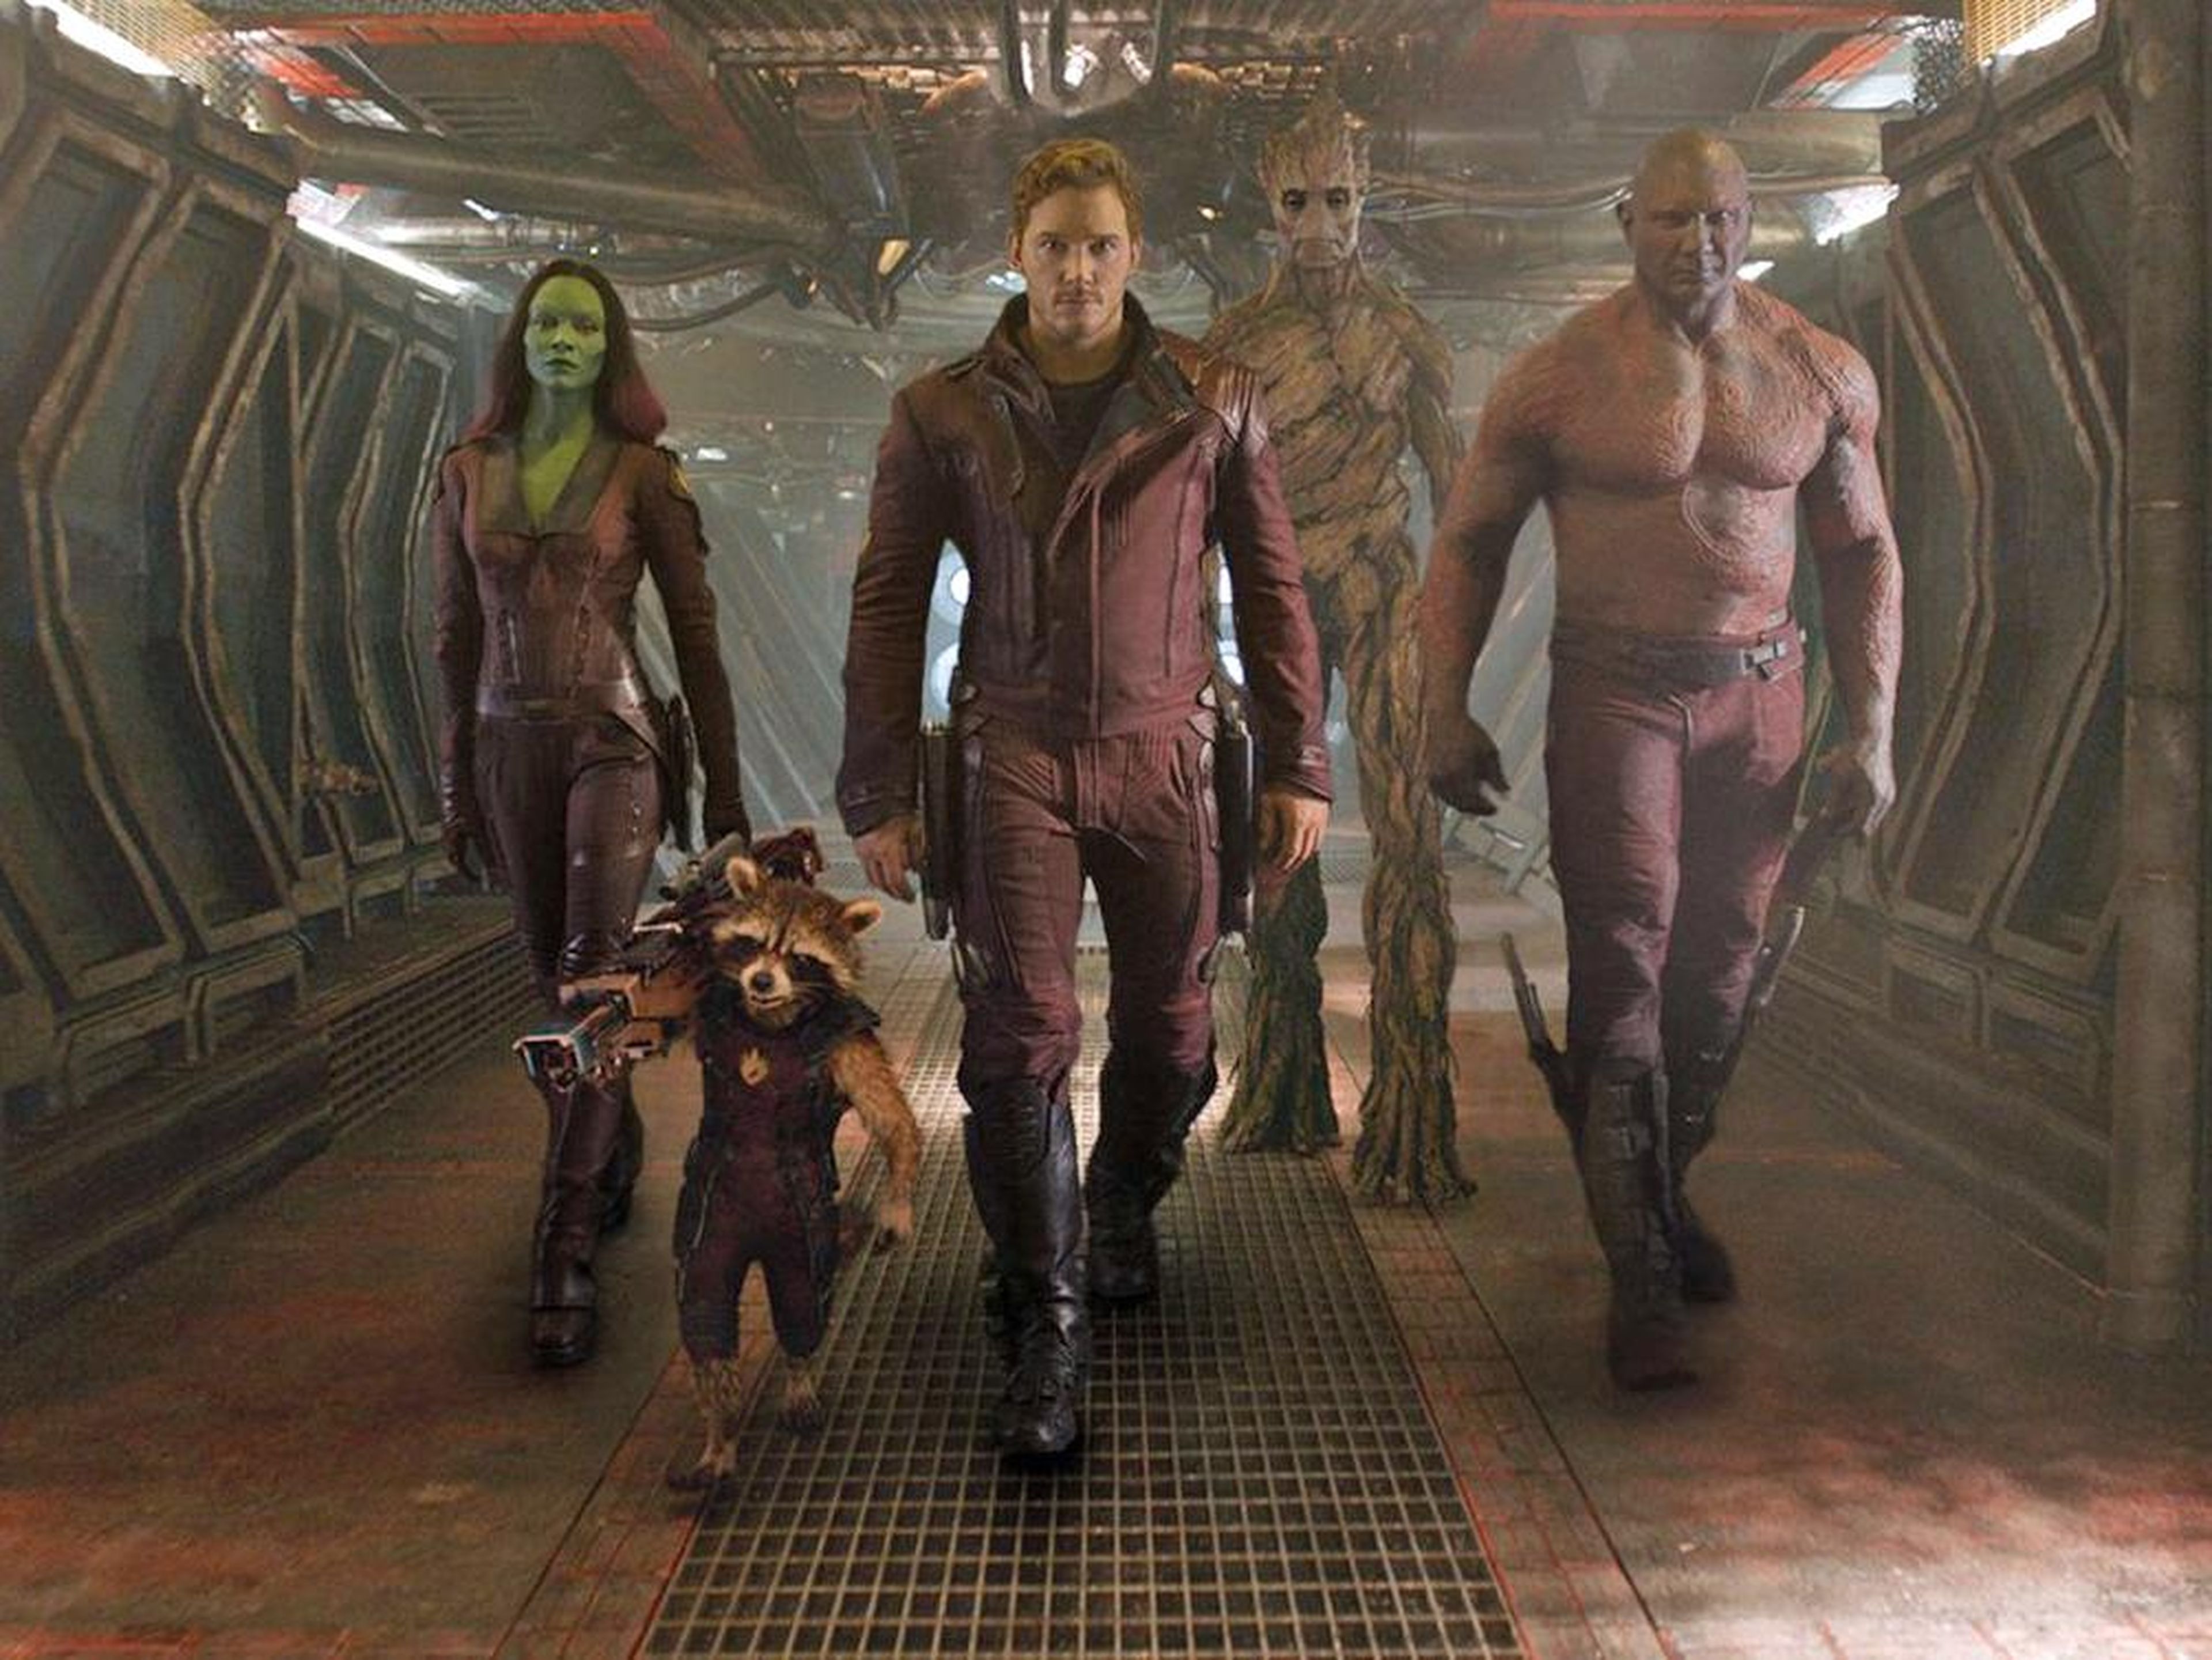 1. "Guardians of the Galaxy" (2014)